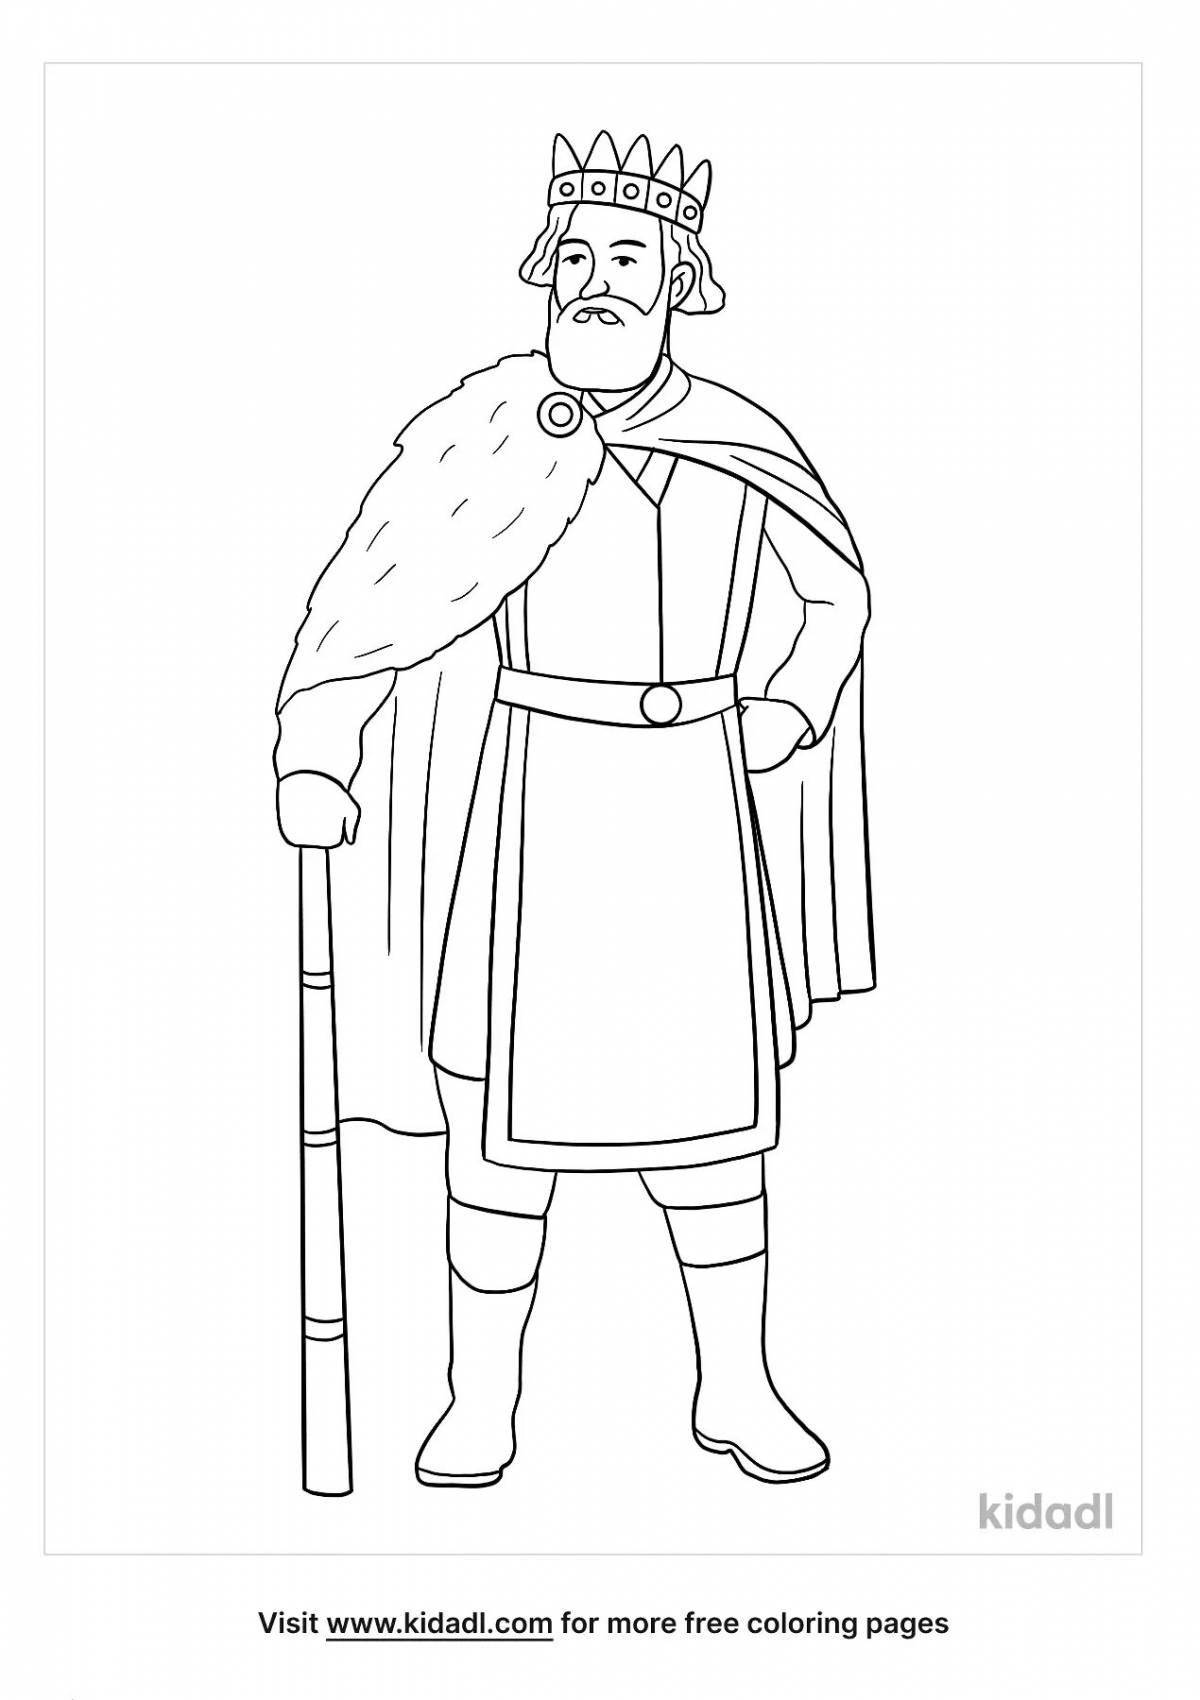 Generous king coloring book for kids